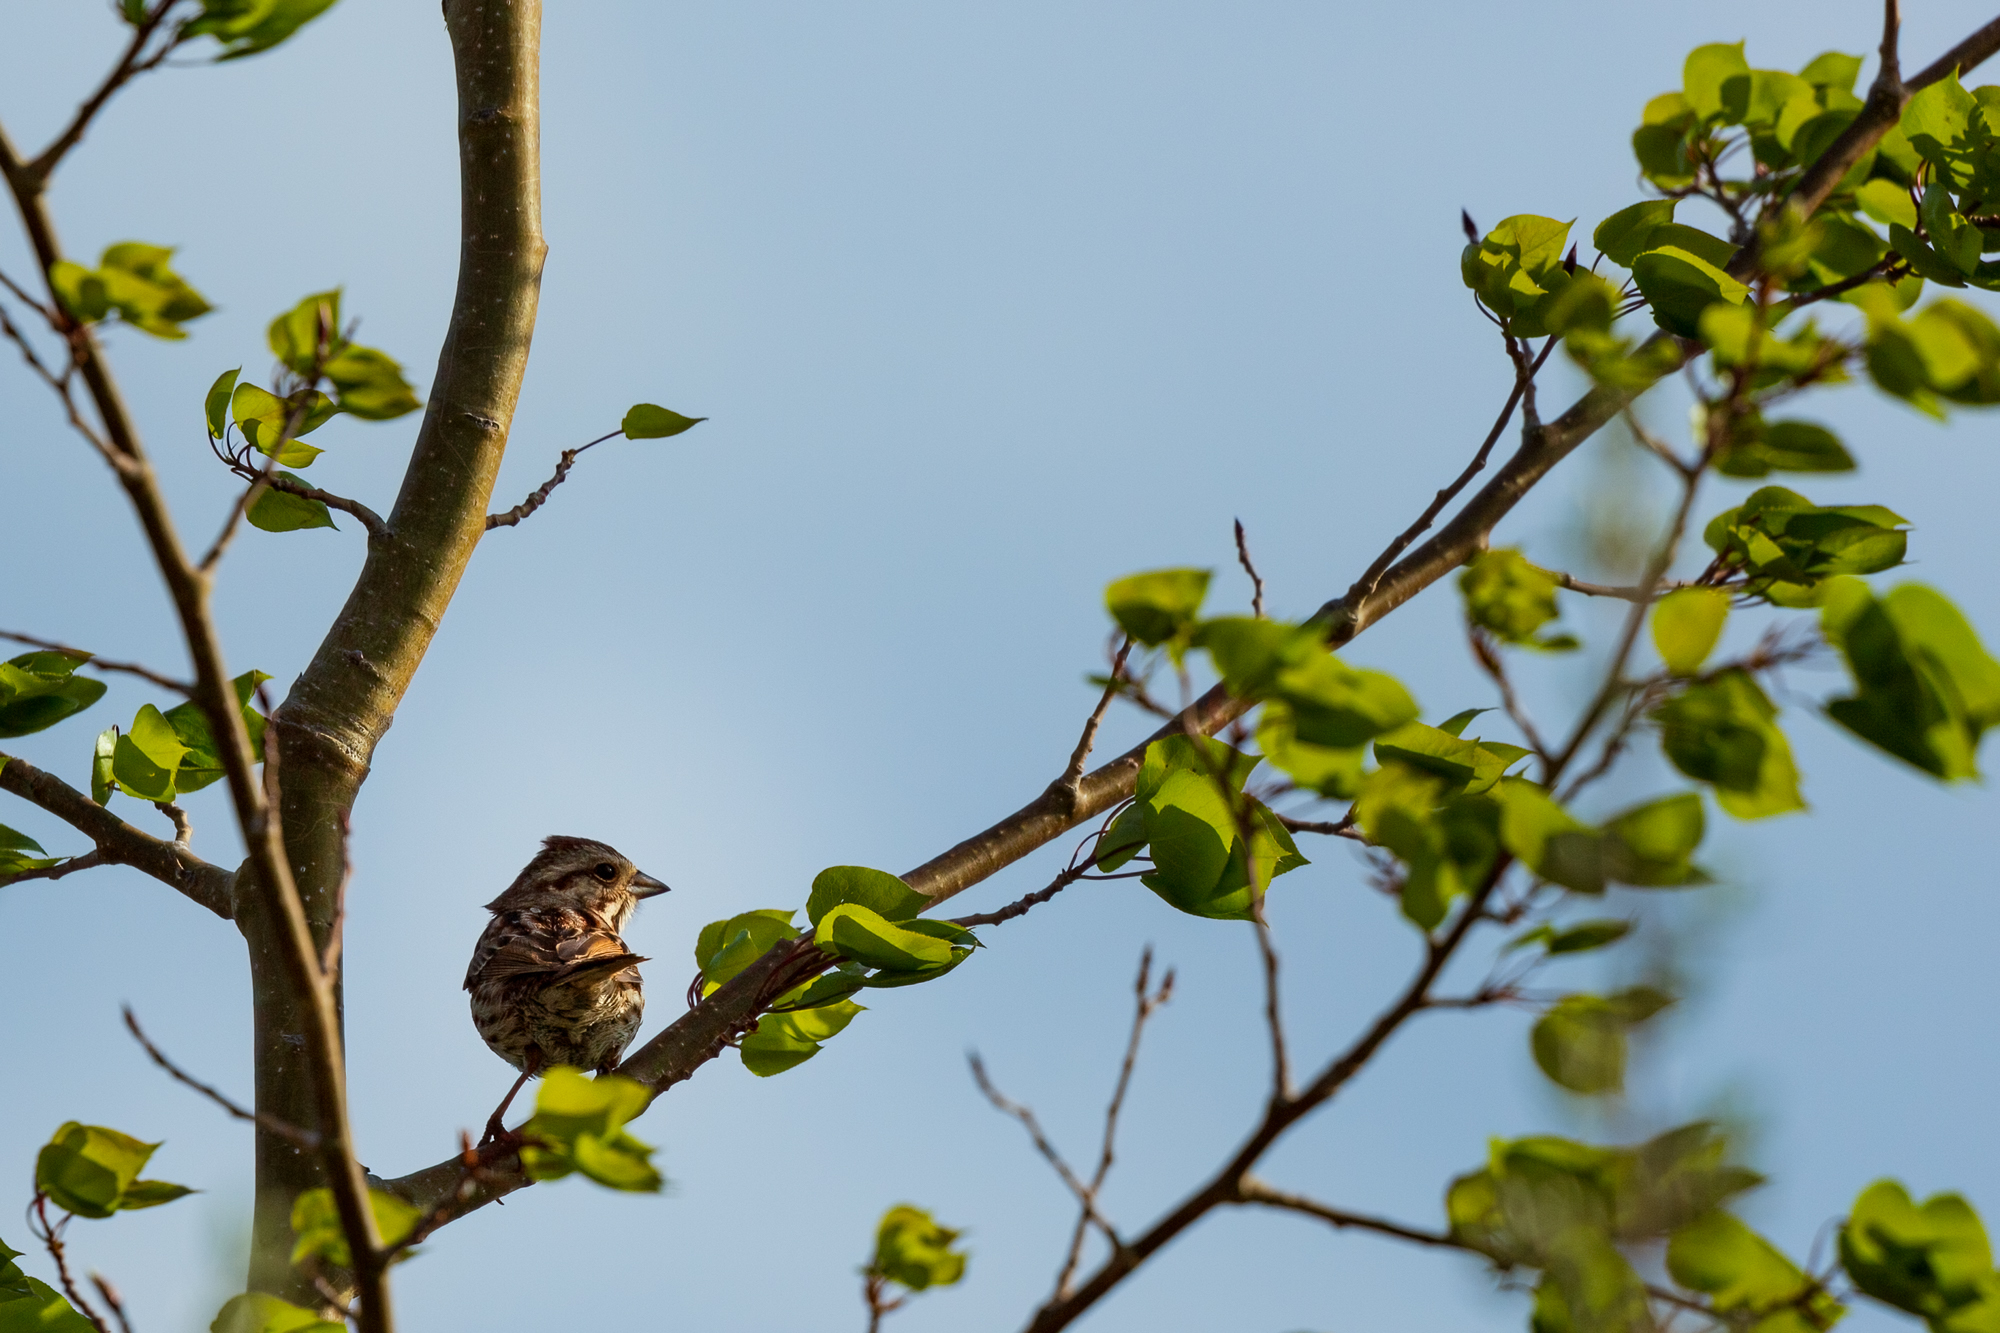 Song Sparrow sitting on a leafy branch up in a tree